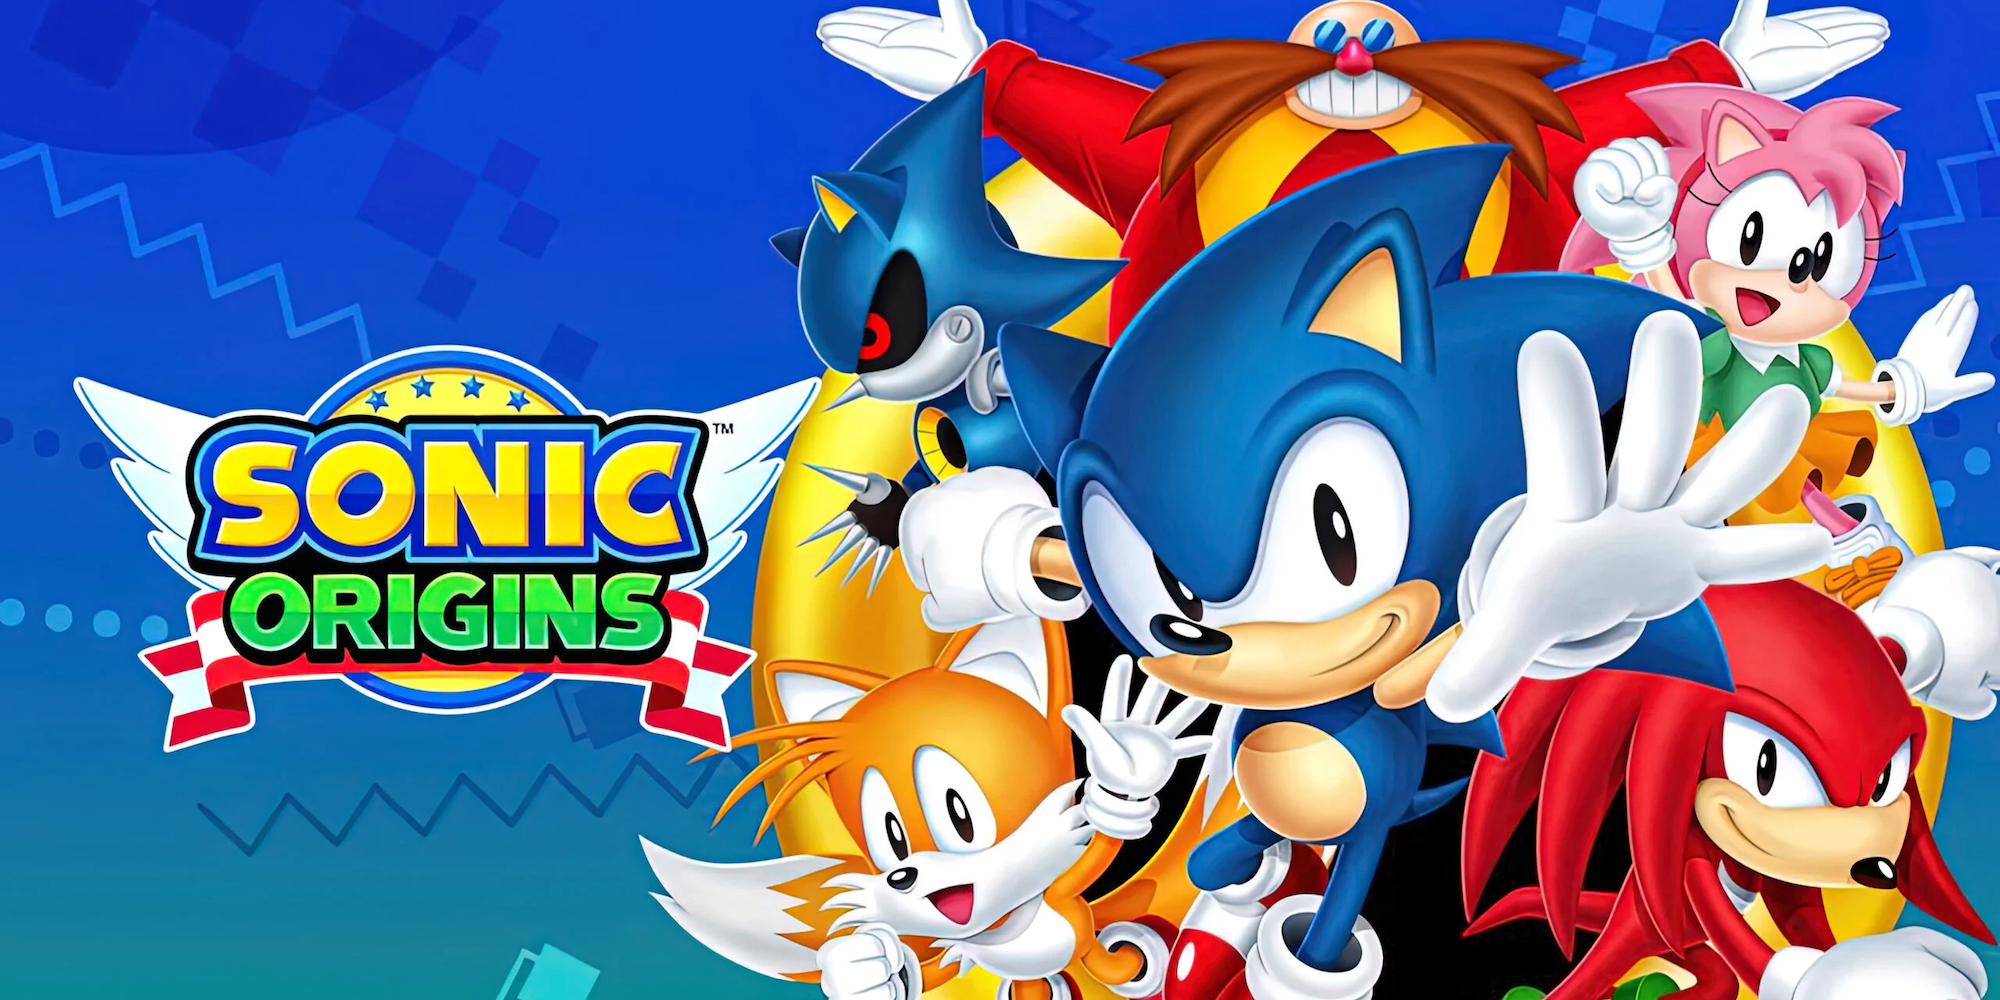 Sonic Classic Heroes - Play Sonic Classic Heroes On New Trending Retro  Games Of The Year! Play Now And Review The Memories.